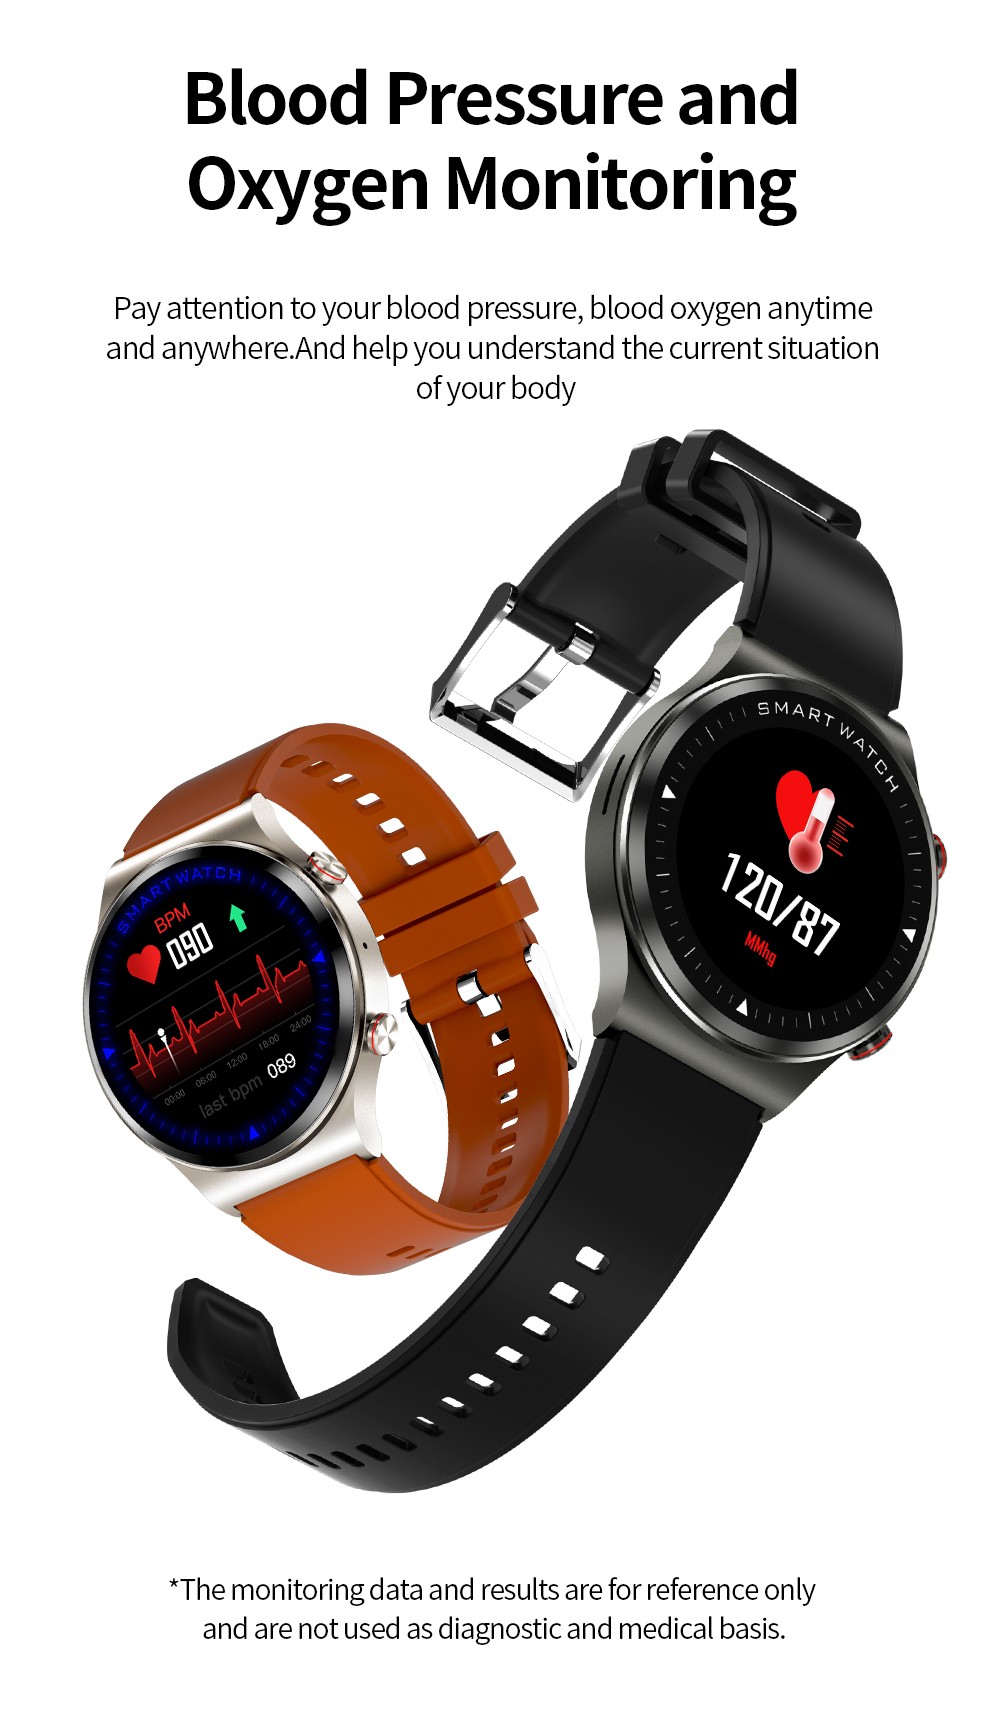 KUMI GT5 Smartwatch 1.28'' IPS HD Screen with BT Call Multiple Sports Heart Rate Monitor SpO2 Measurement - Black